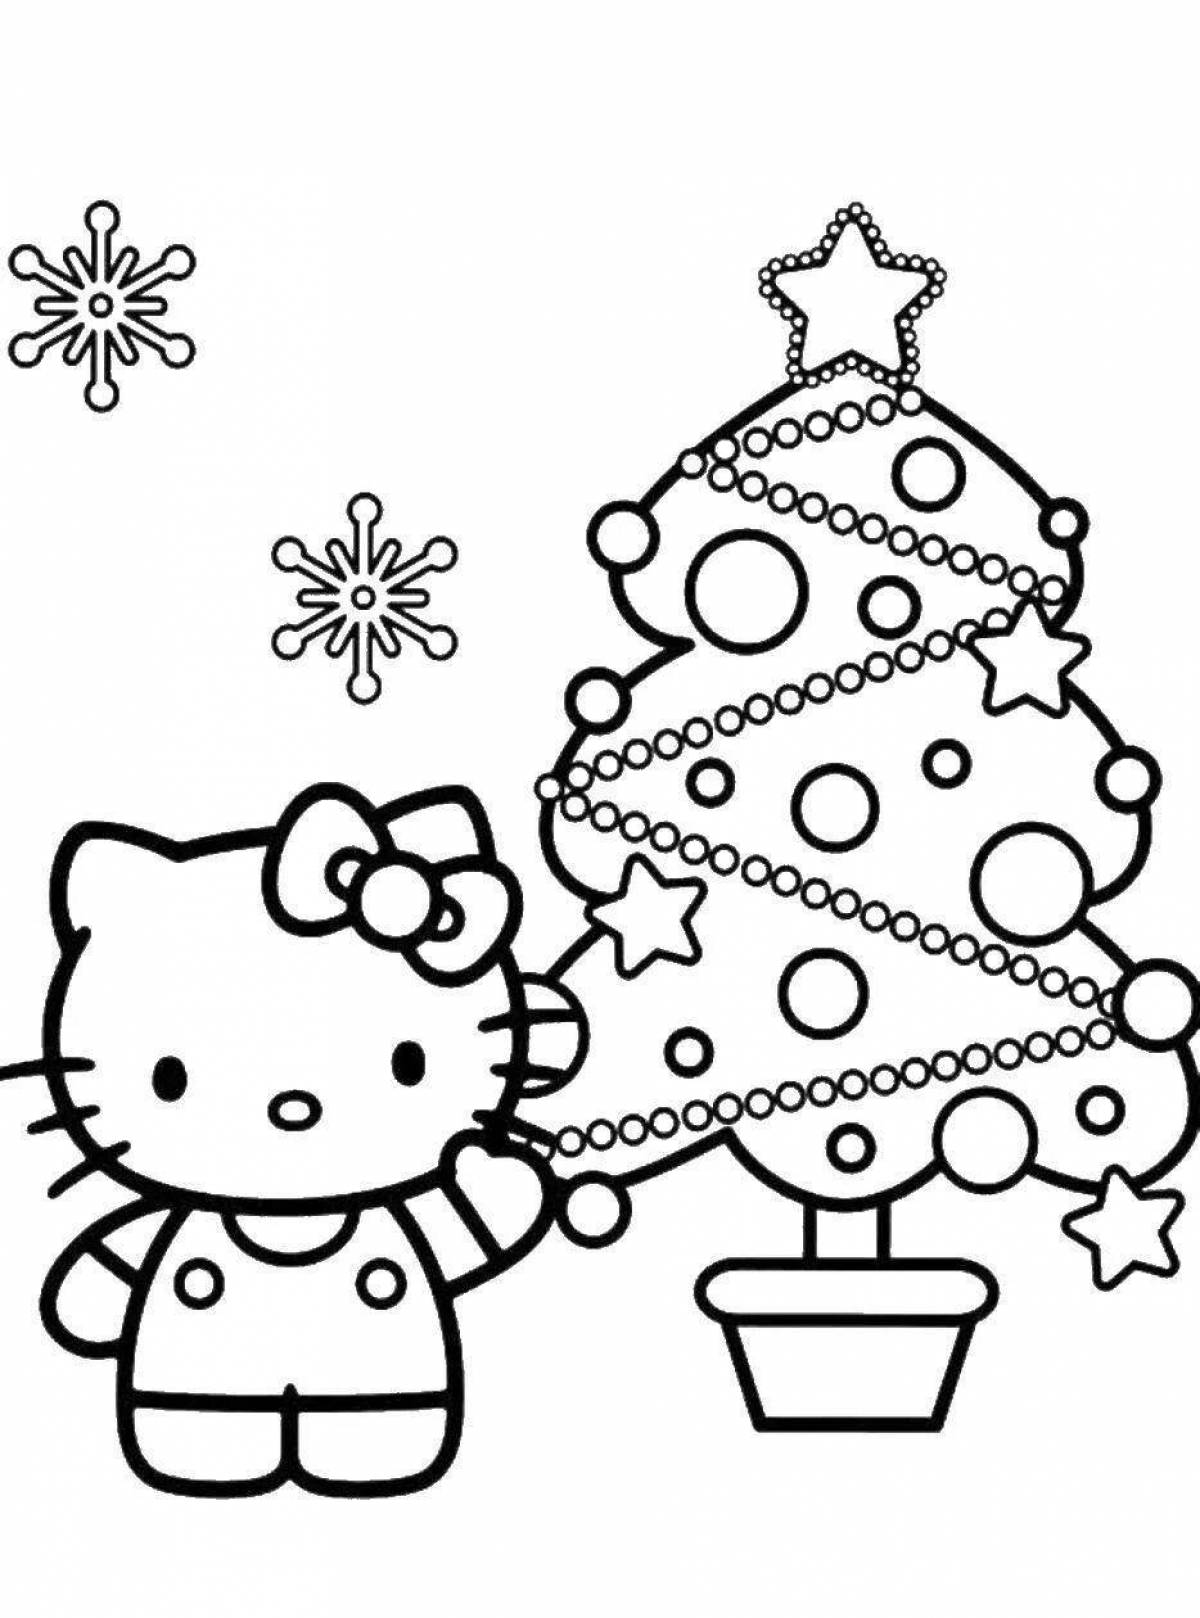 Colorful and illustrative Christmas coloring book for children